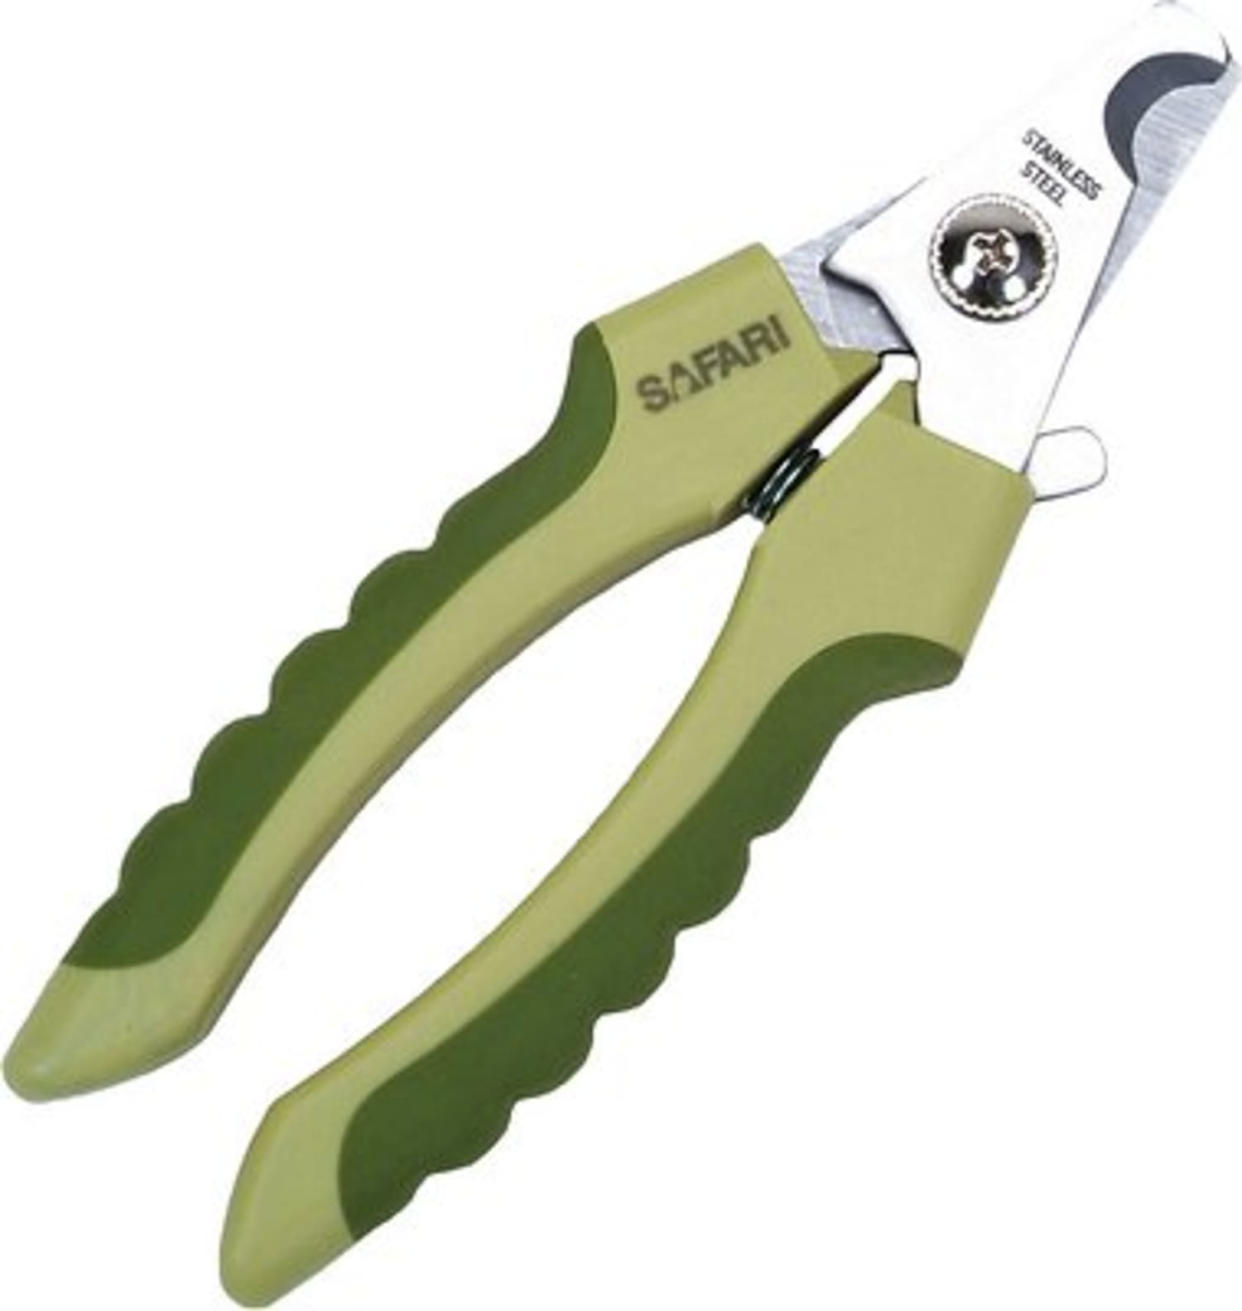 Safari Professional Nail Trimmer for Dogs. 6 best dog nail trimmers of 2021 ('Multiple' Murder Victims Found in Calif. Home / 'Multiple' Murder Victims Found in Calif. Home)